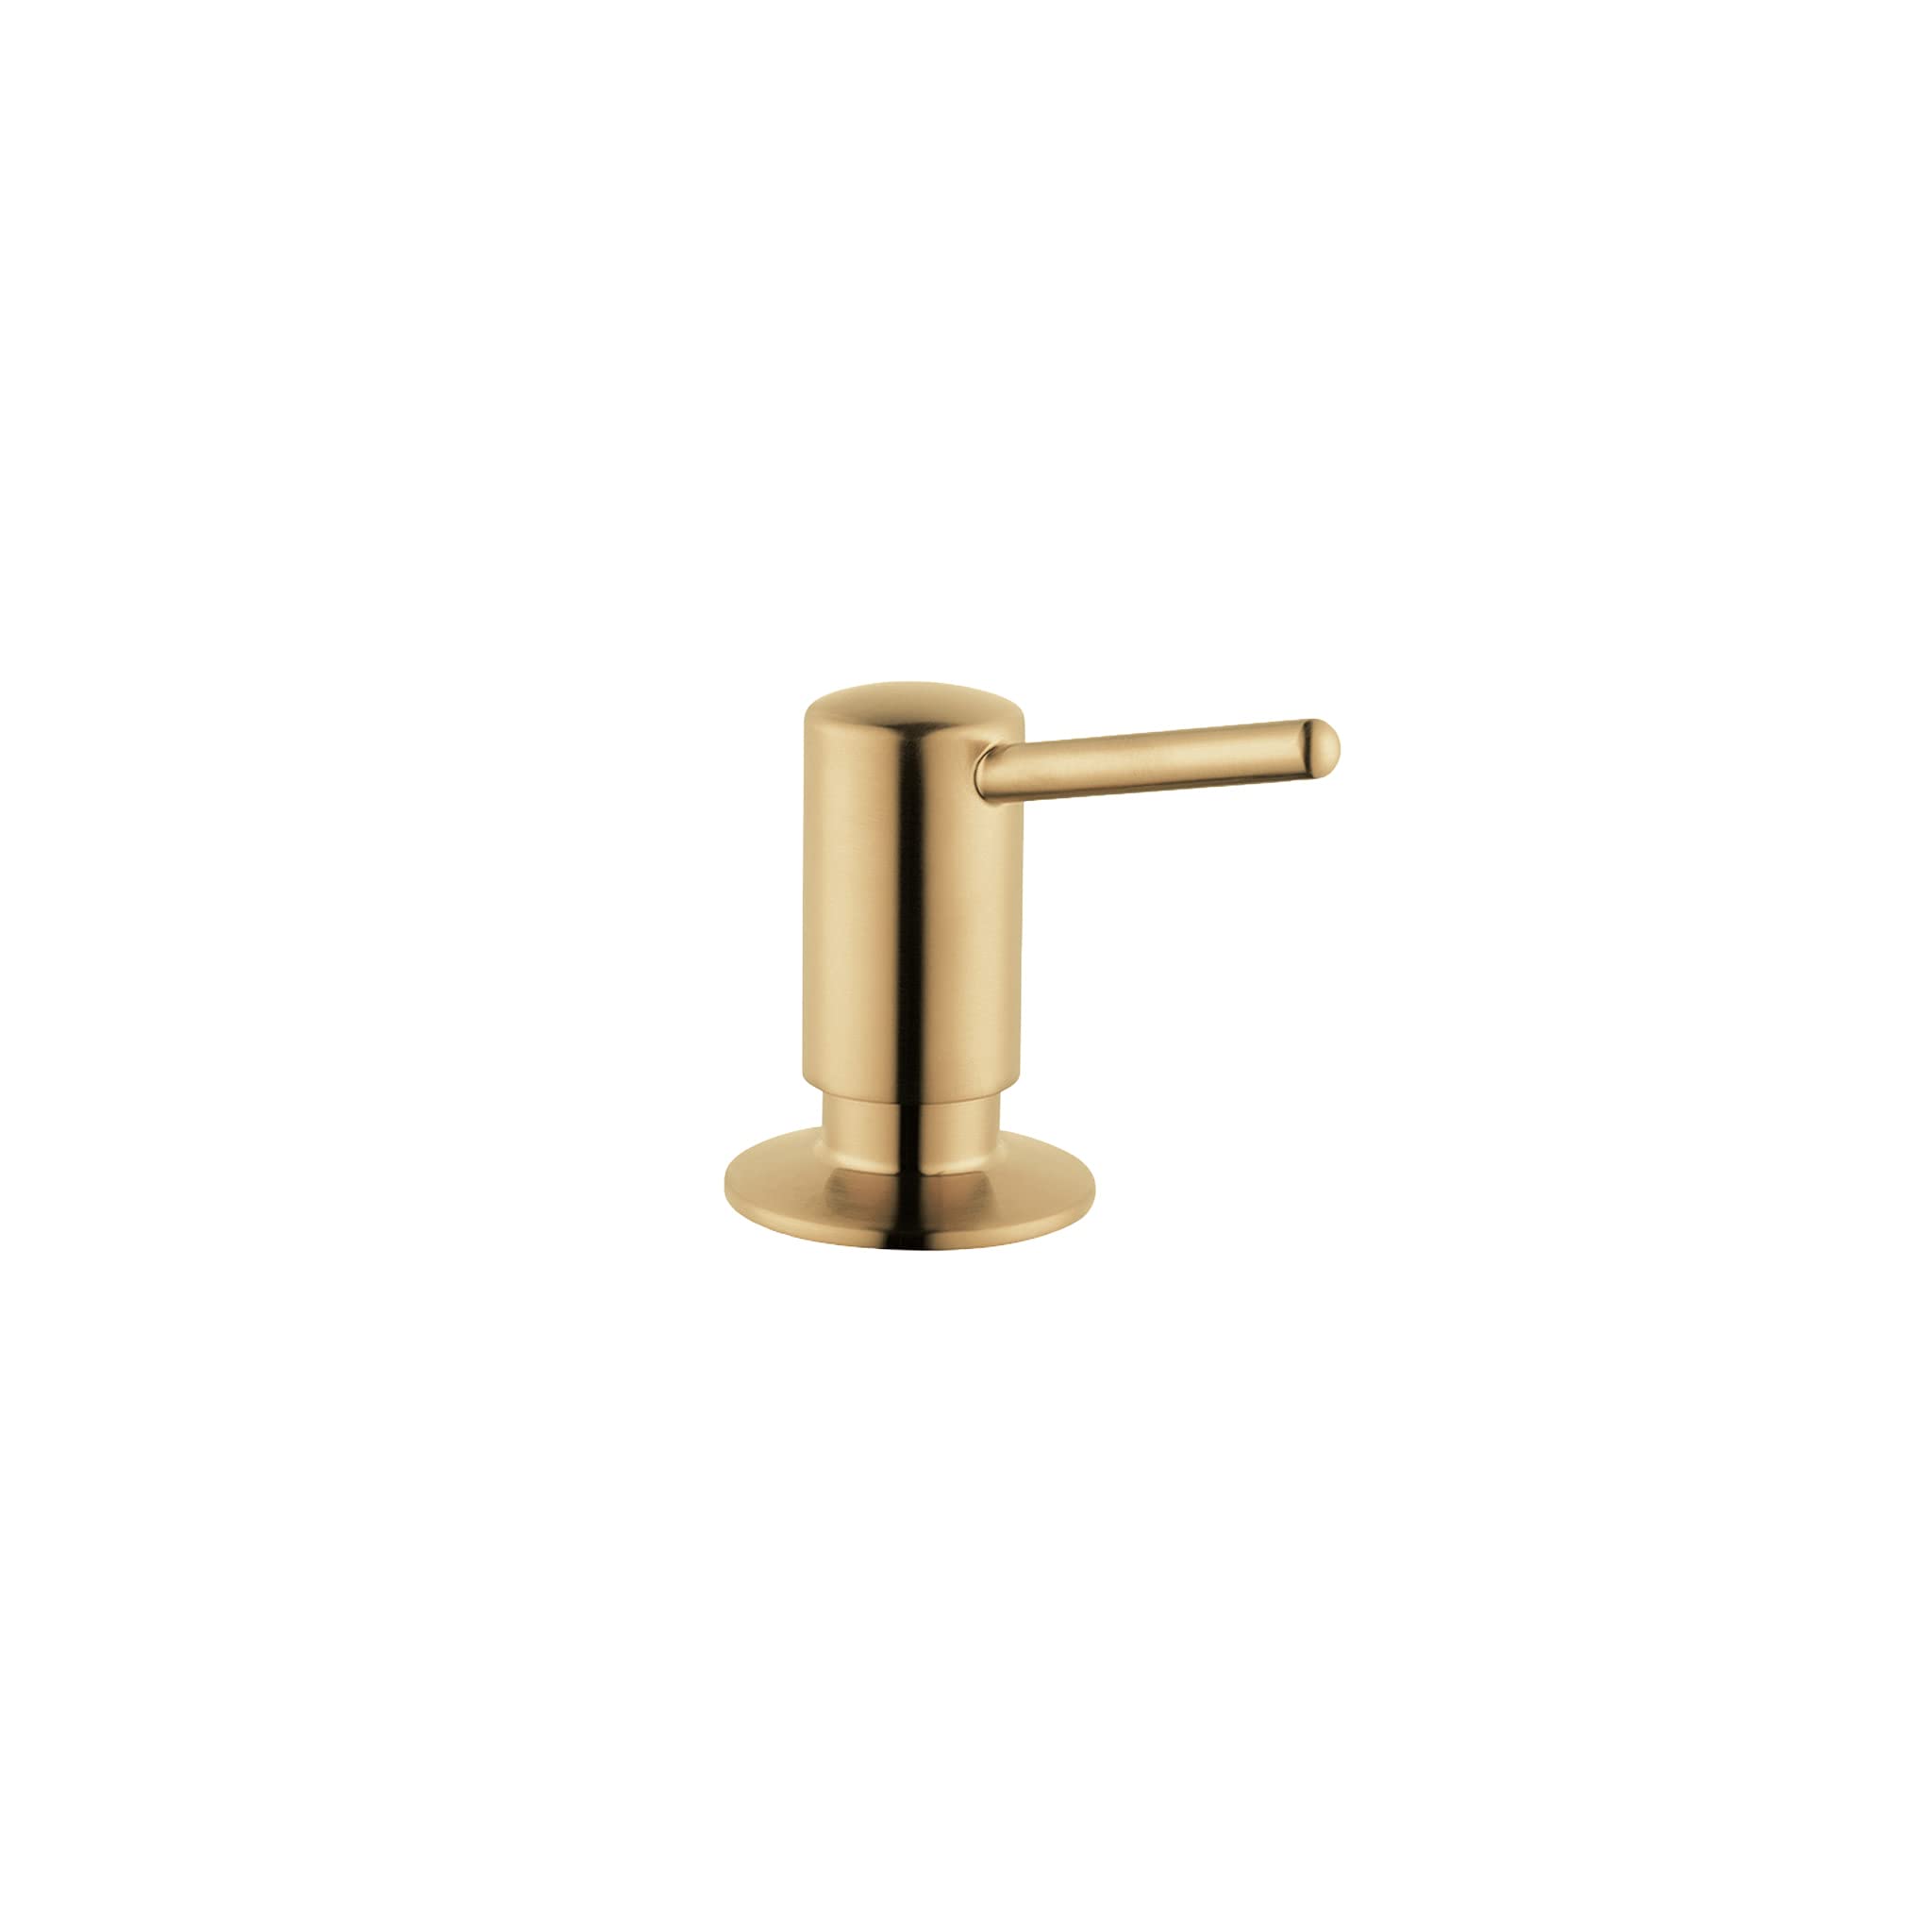 hansgrohe Bath and Kitchen Sink Soap Dispenser, Contemporary Modern in Brushed Gold Optic, 04539250